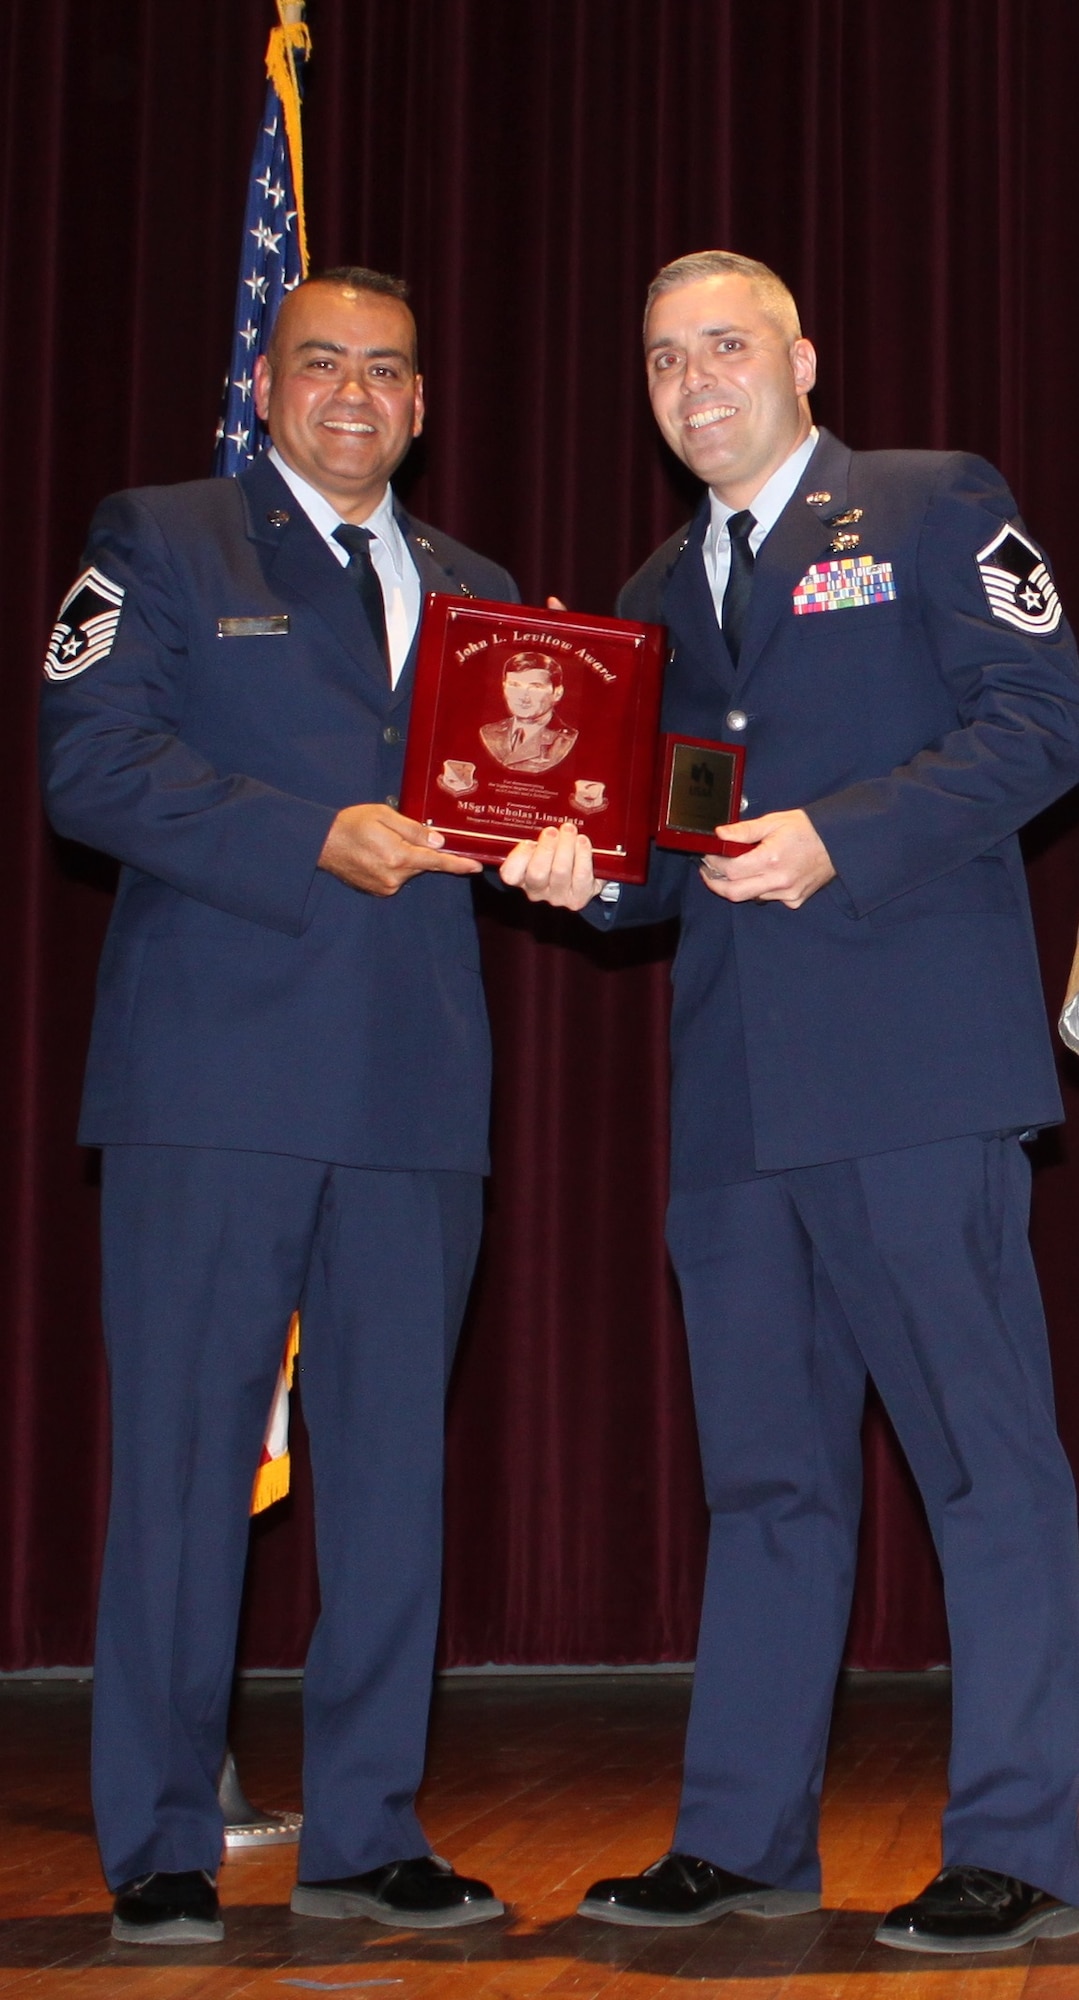 Office of Special Investigations Special Agent Nicholas Linsalata accepts the John L. Levitow Award from Senior Master Sgt. Jason A. Ramon, Sheppard Air Force Base, Texas, Noncommissioned Officer Academy Director of Education, during ceremonies Feb. 21, 2020, for the largest NCOA graduating class in history, 304 students. (Sheppard NCOA photo)